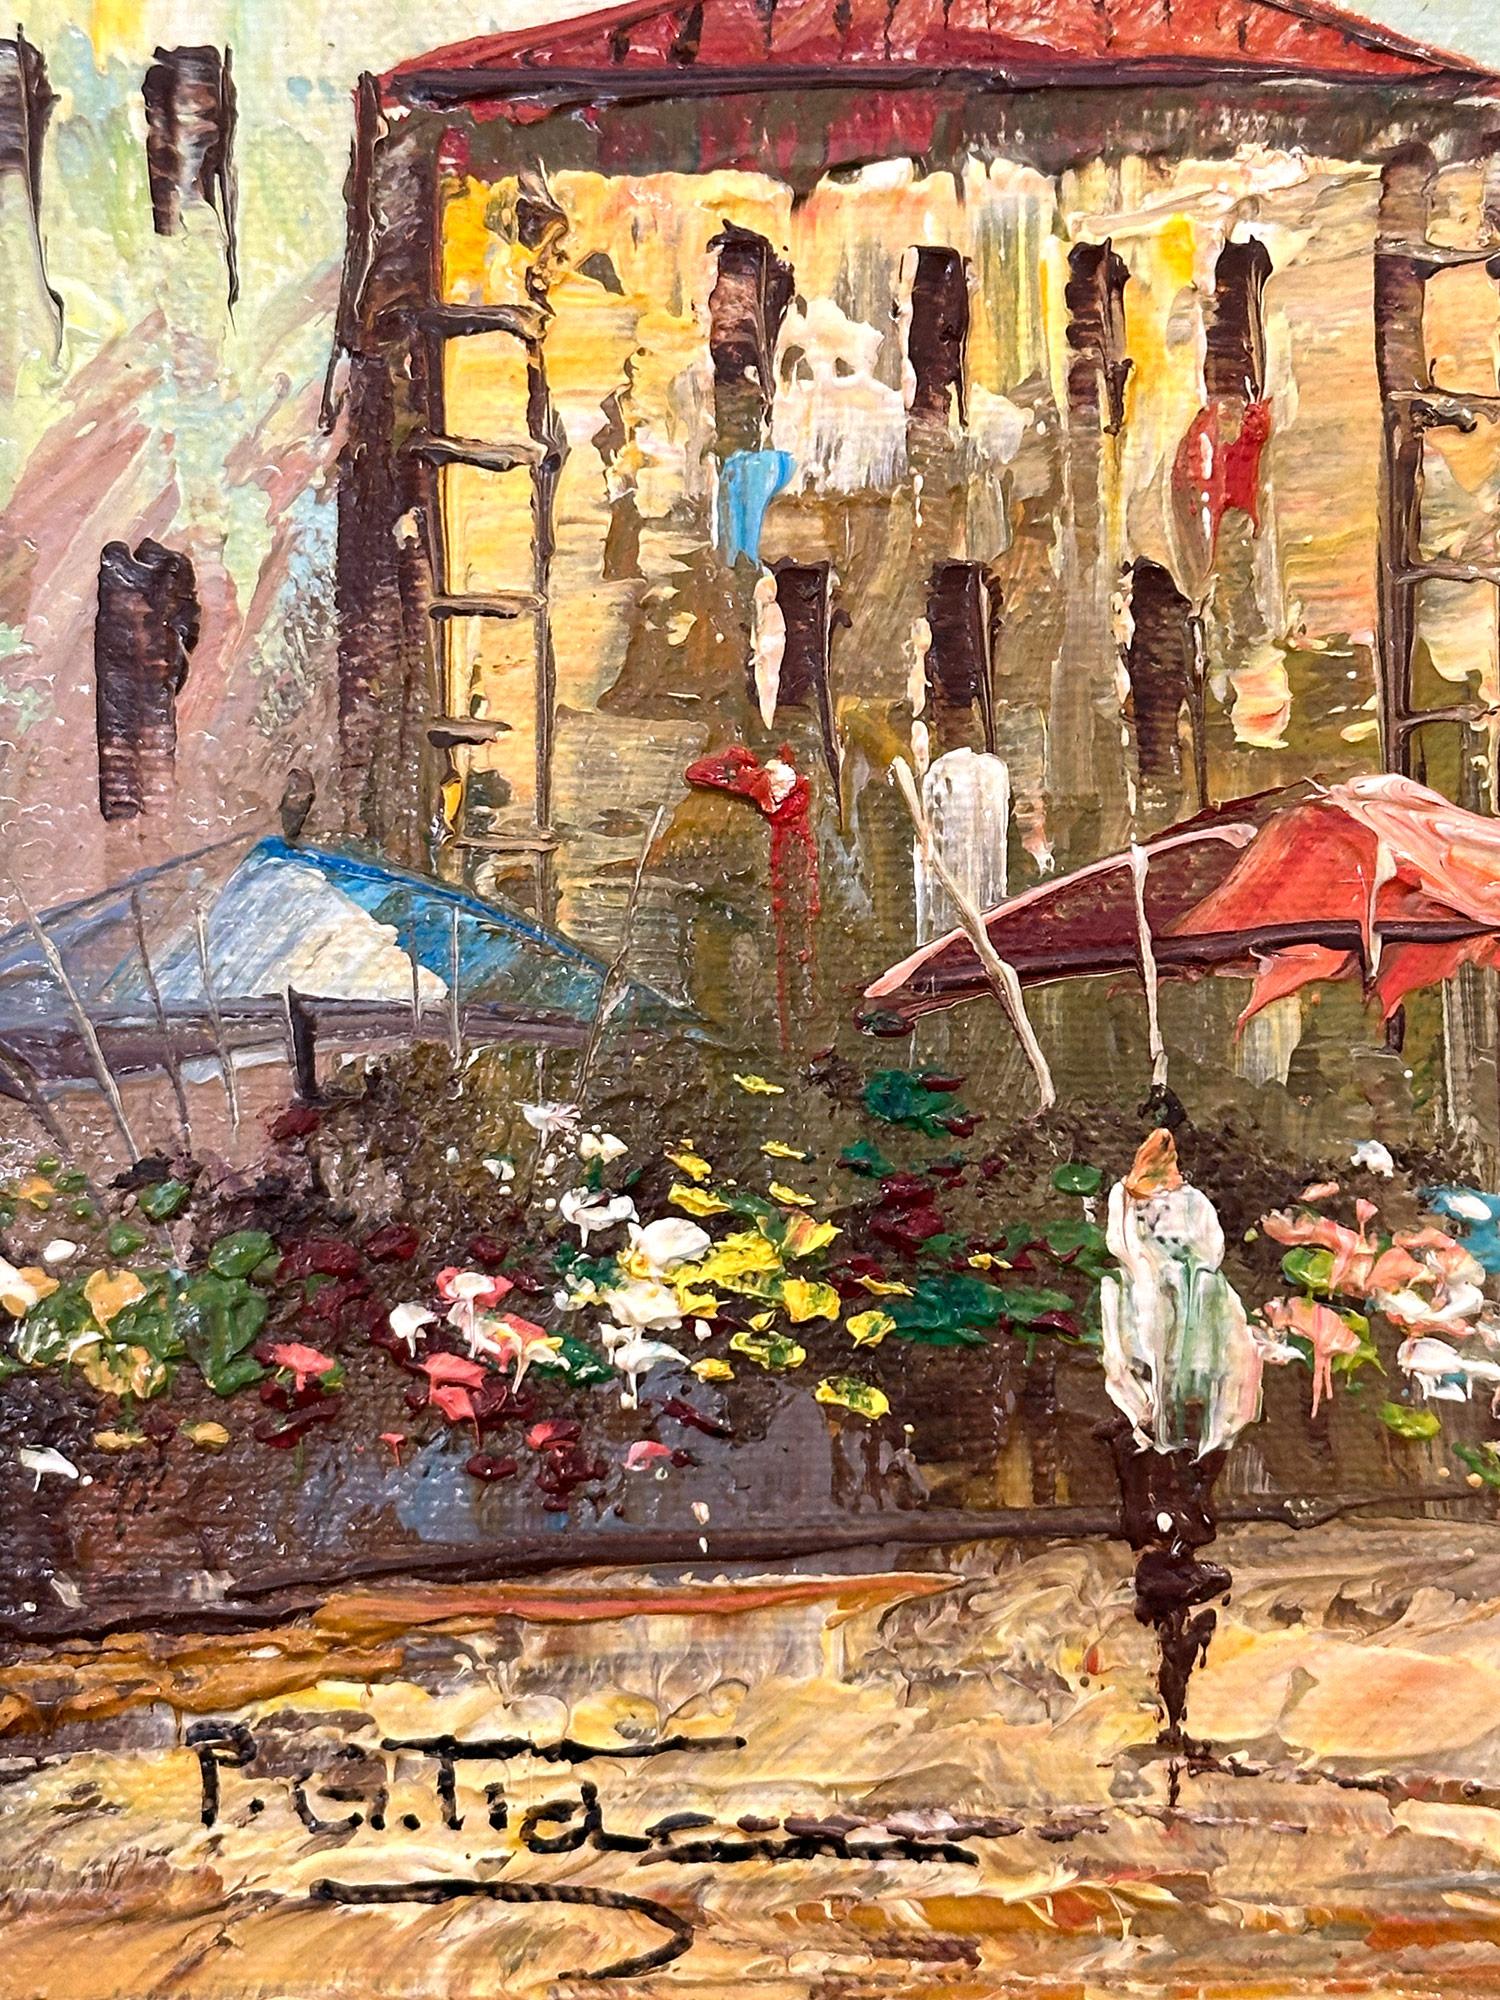 This painting depicts a colorful Mid Century Street in Paris France, a popular subject of the times painted by many important impressionist 20th Century painters. This piece is a bold display of color and thick use of paint. The artist captures the